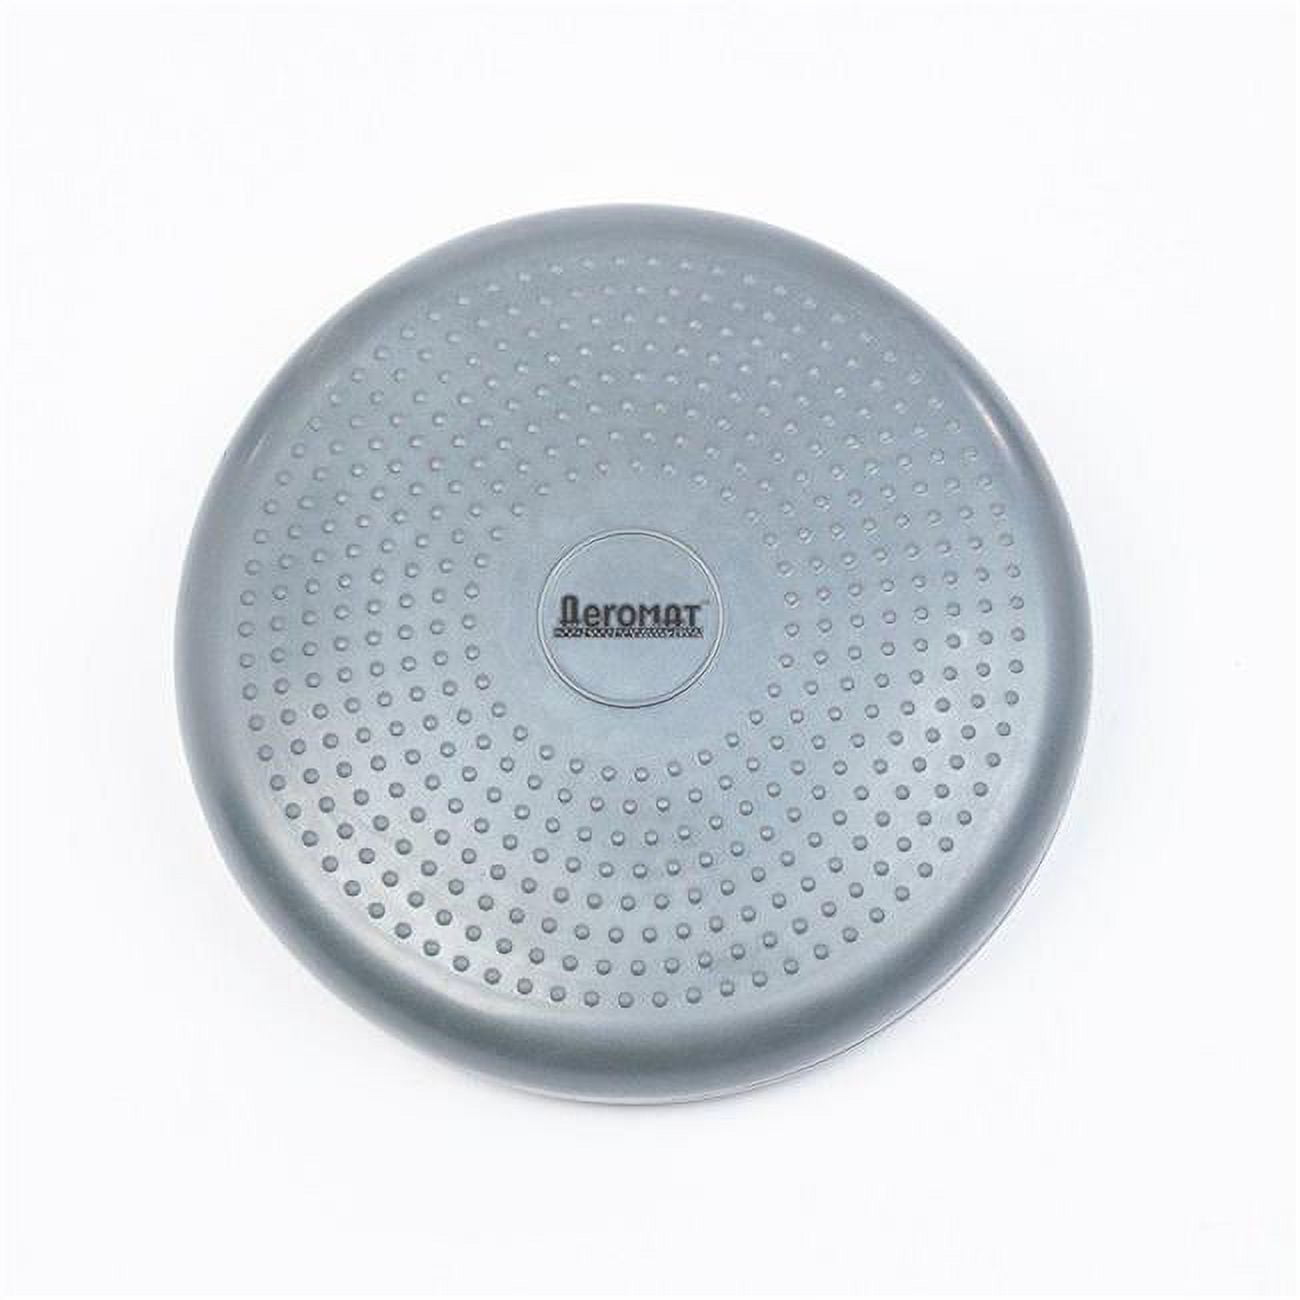 Picture of AGM Group 33303 13.5 dia. Aeromat Deluxe Balance Cushion, Gray